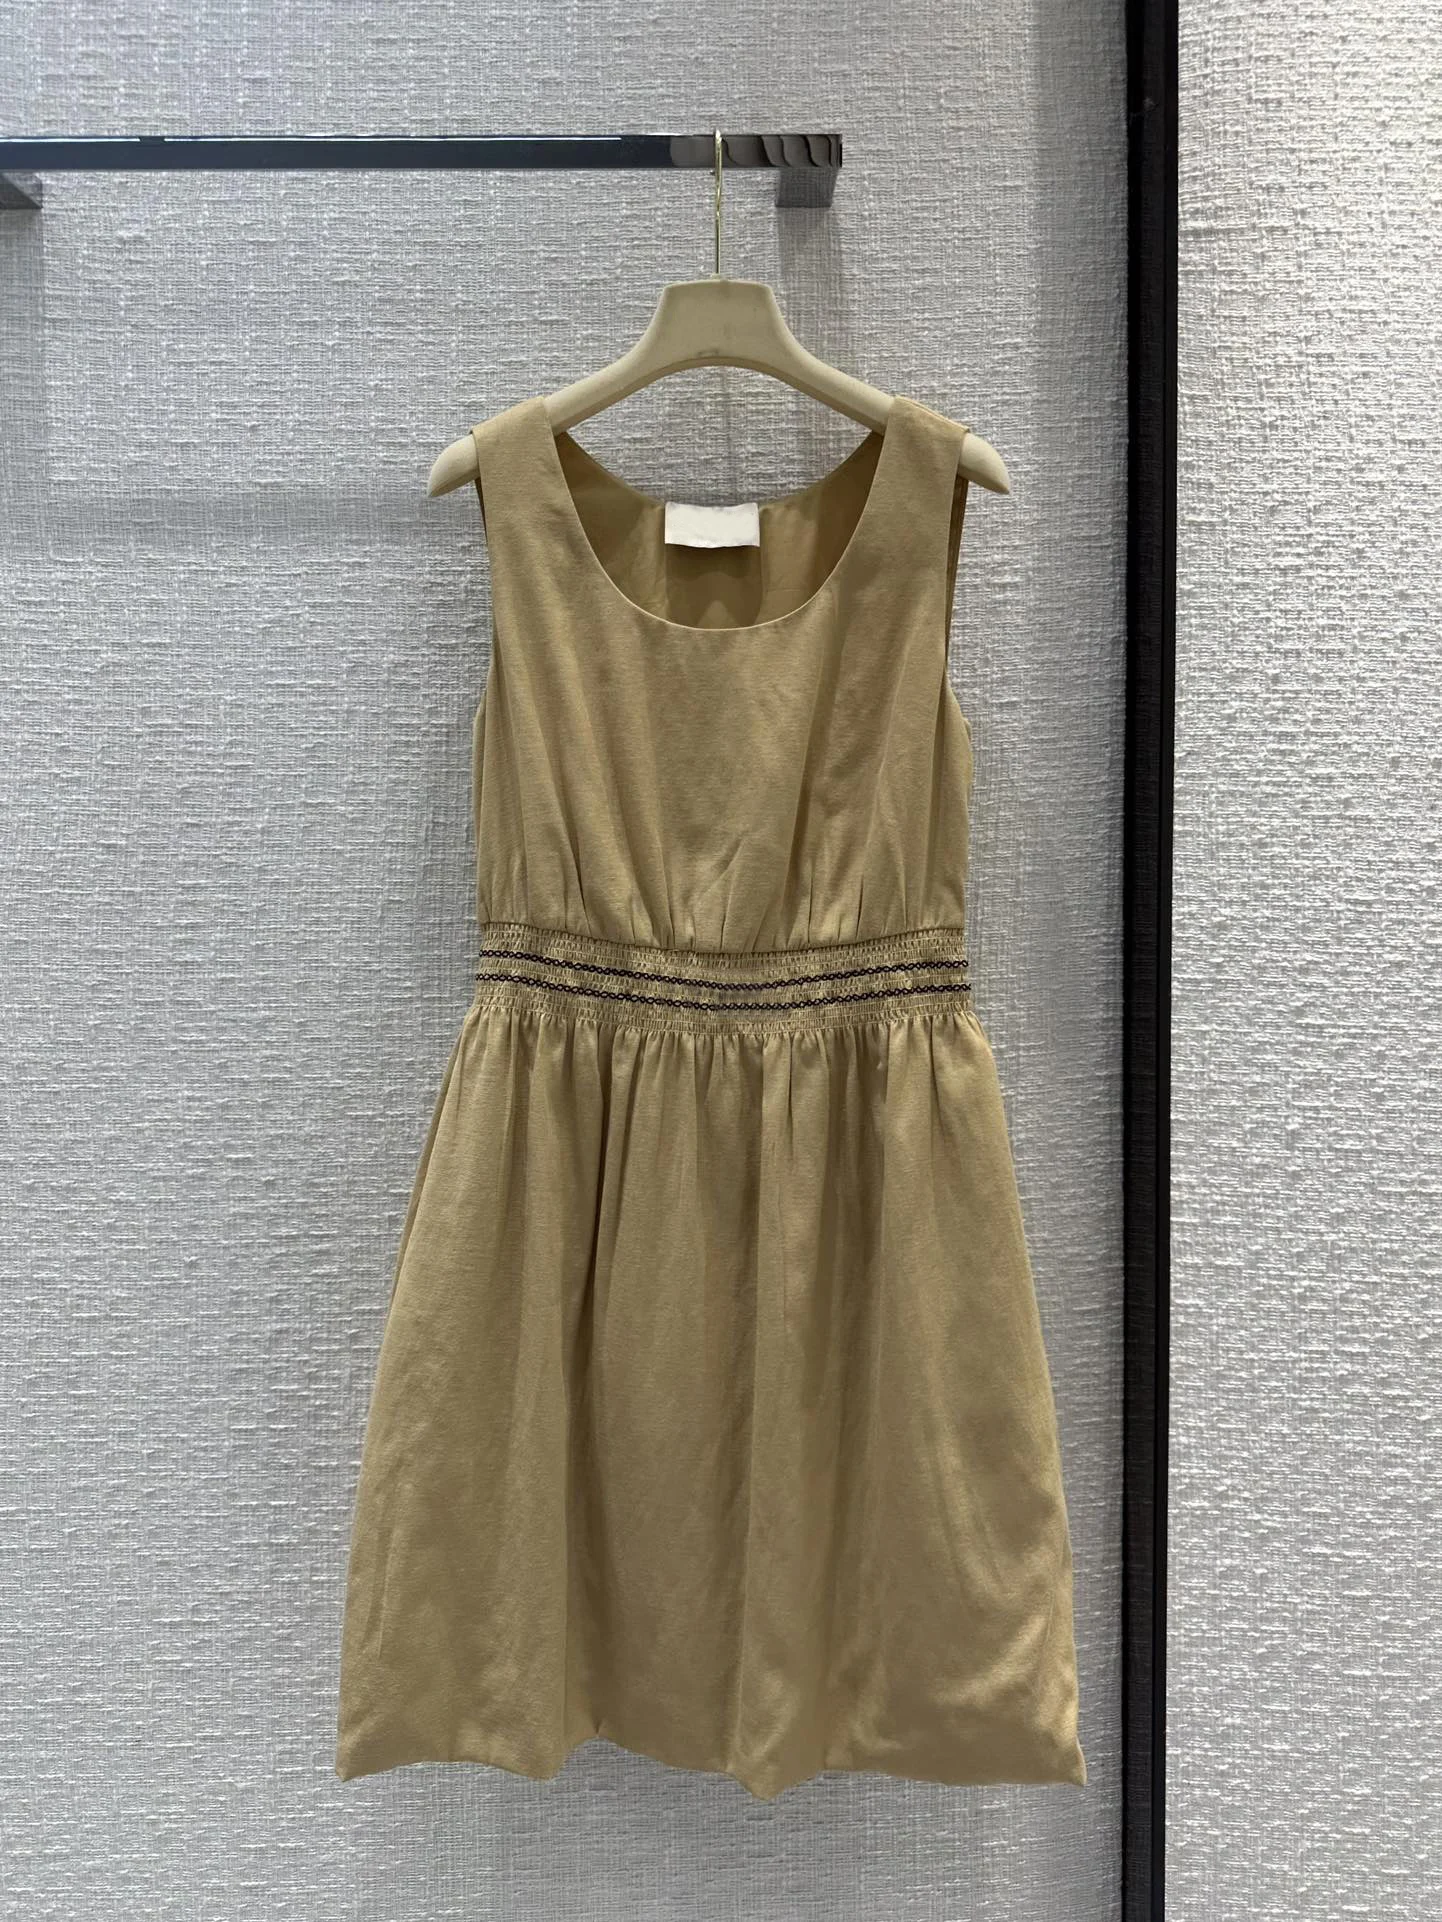 23 New for spring/summer, Khaki sleeveless dress with contrasting geometric lines around embroidered logo craft6.18